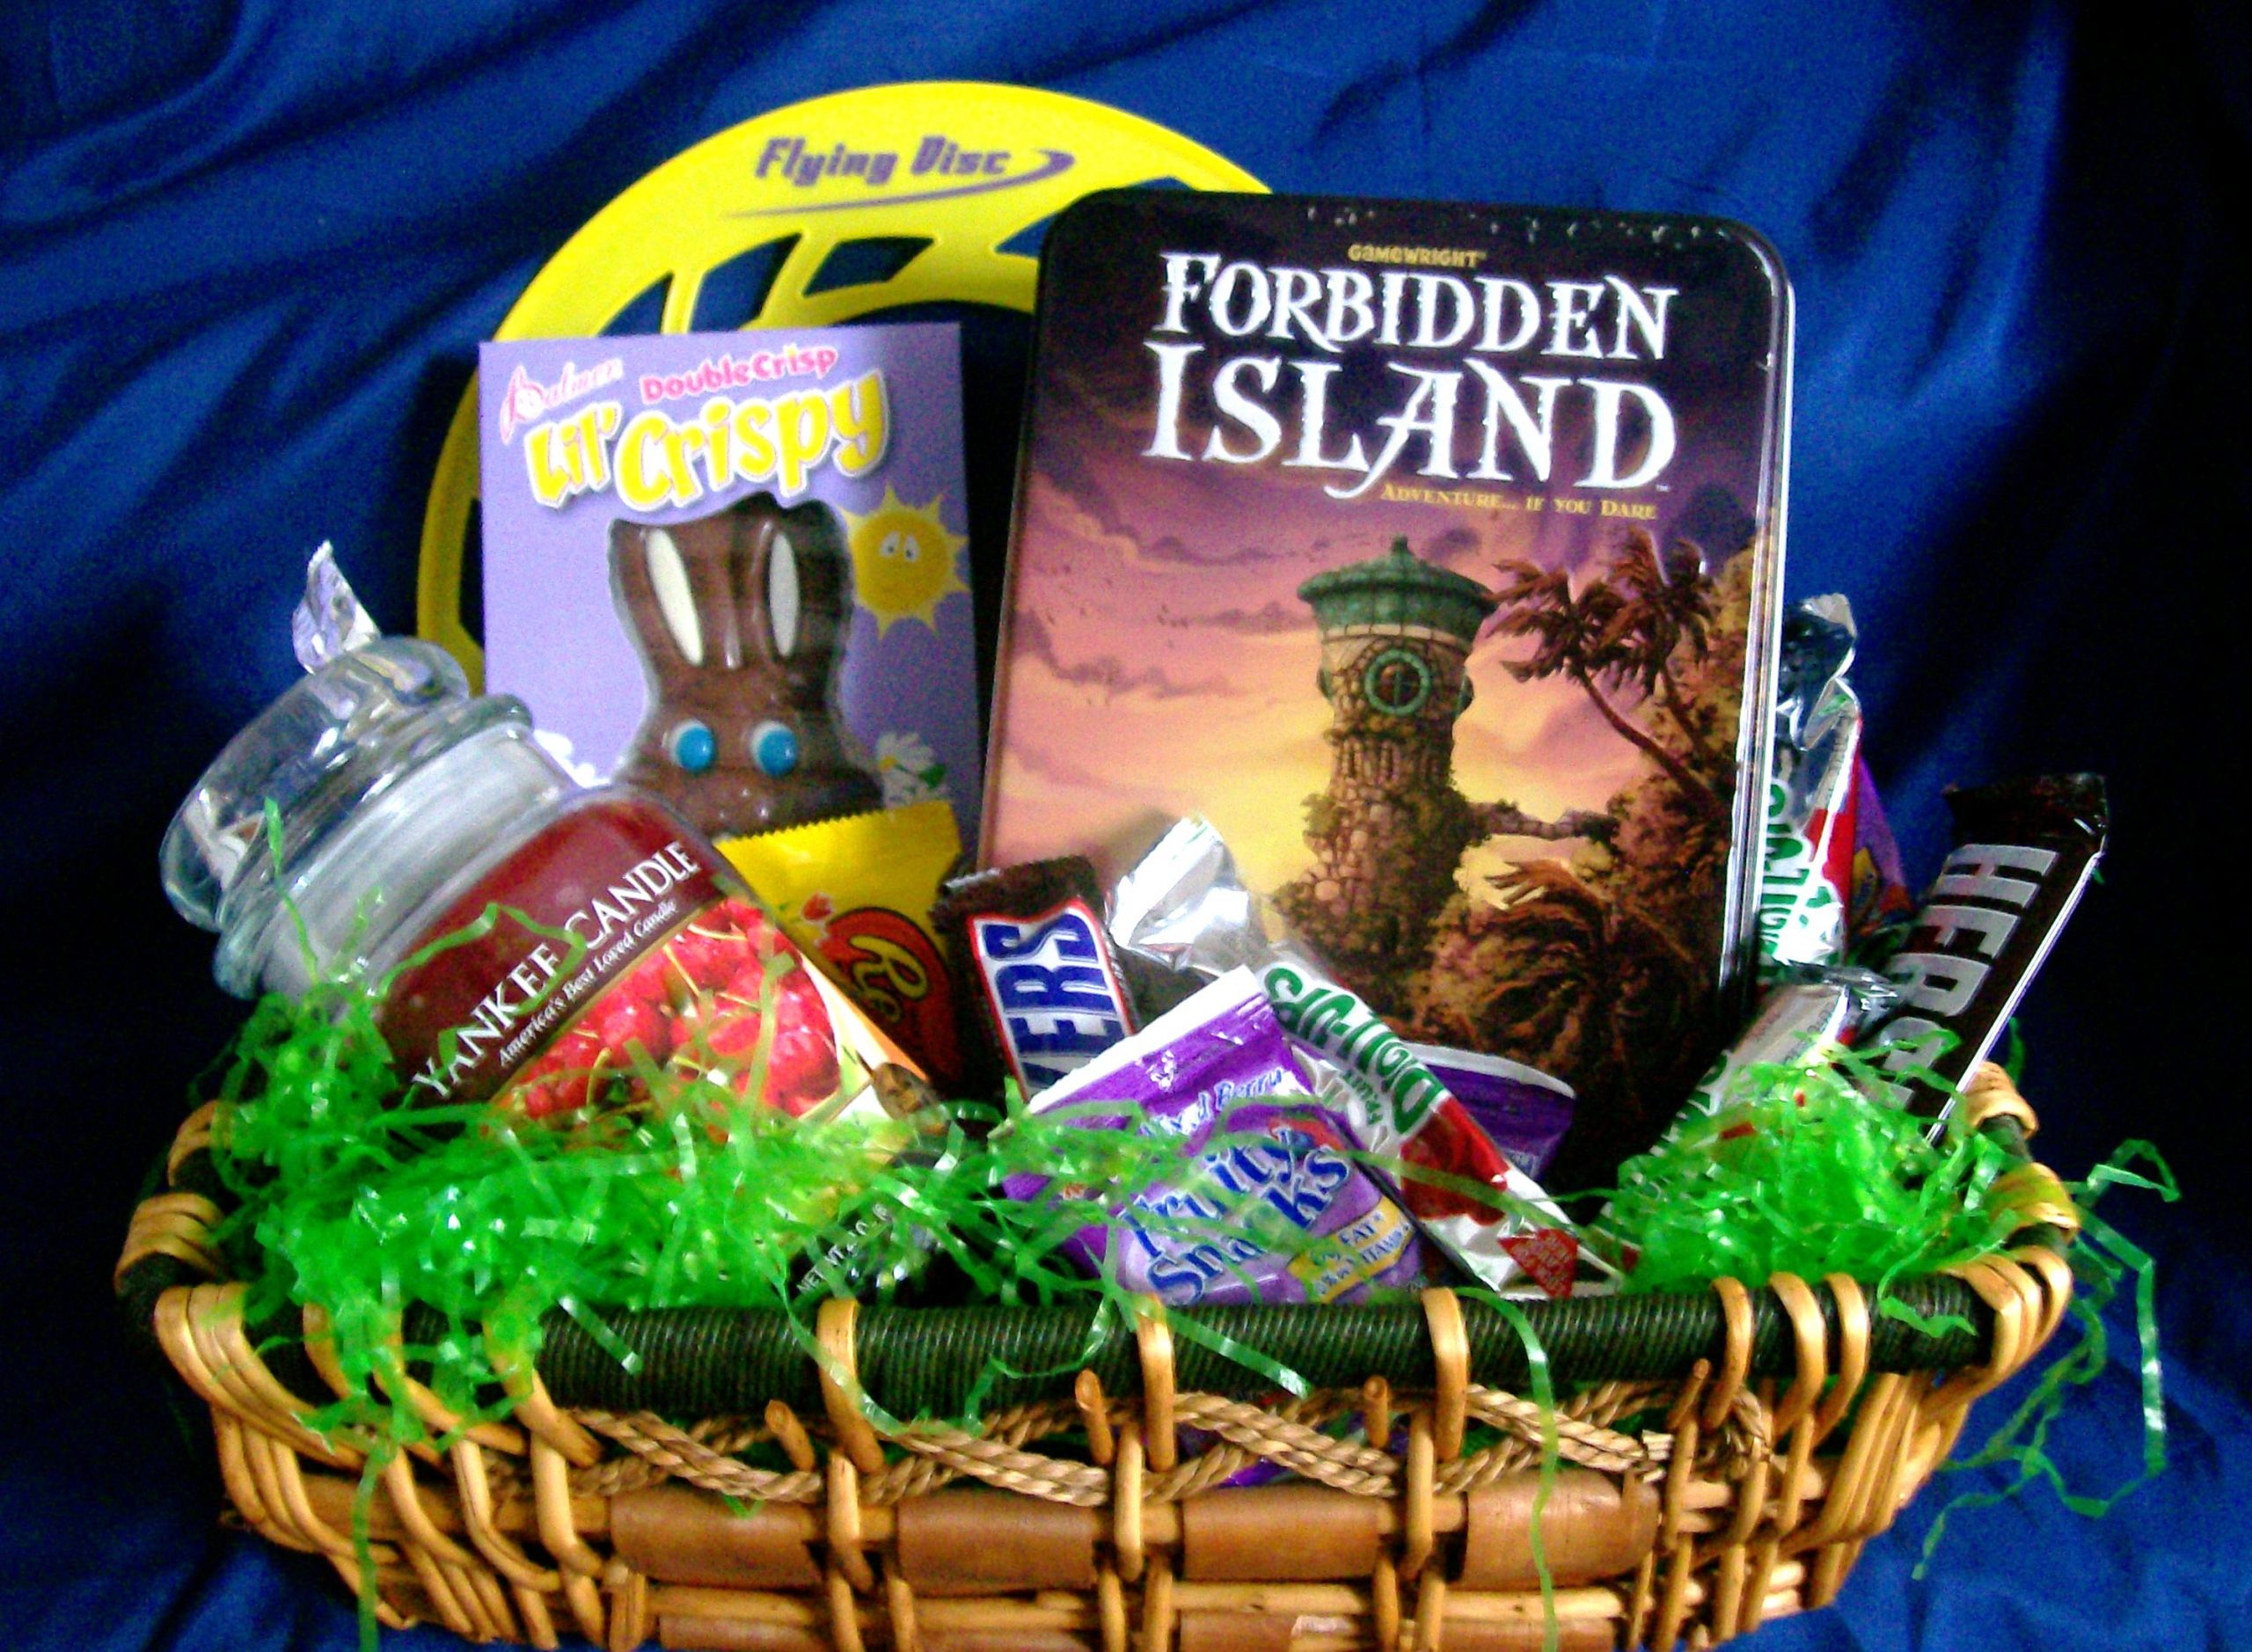 Game Gift Basket Ideas
 10 Fun and Games Ideas for Easter Baskets or Any Time of